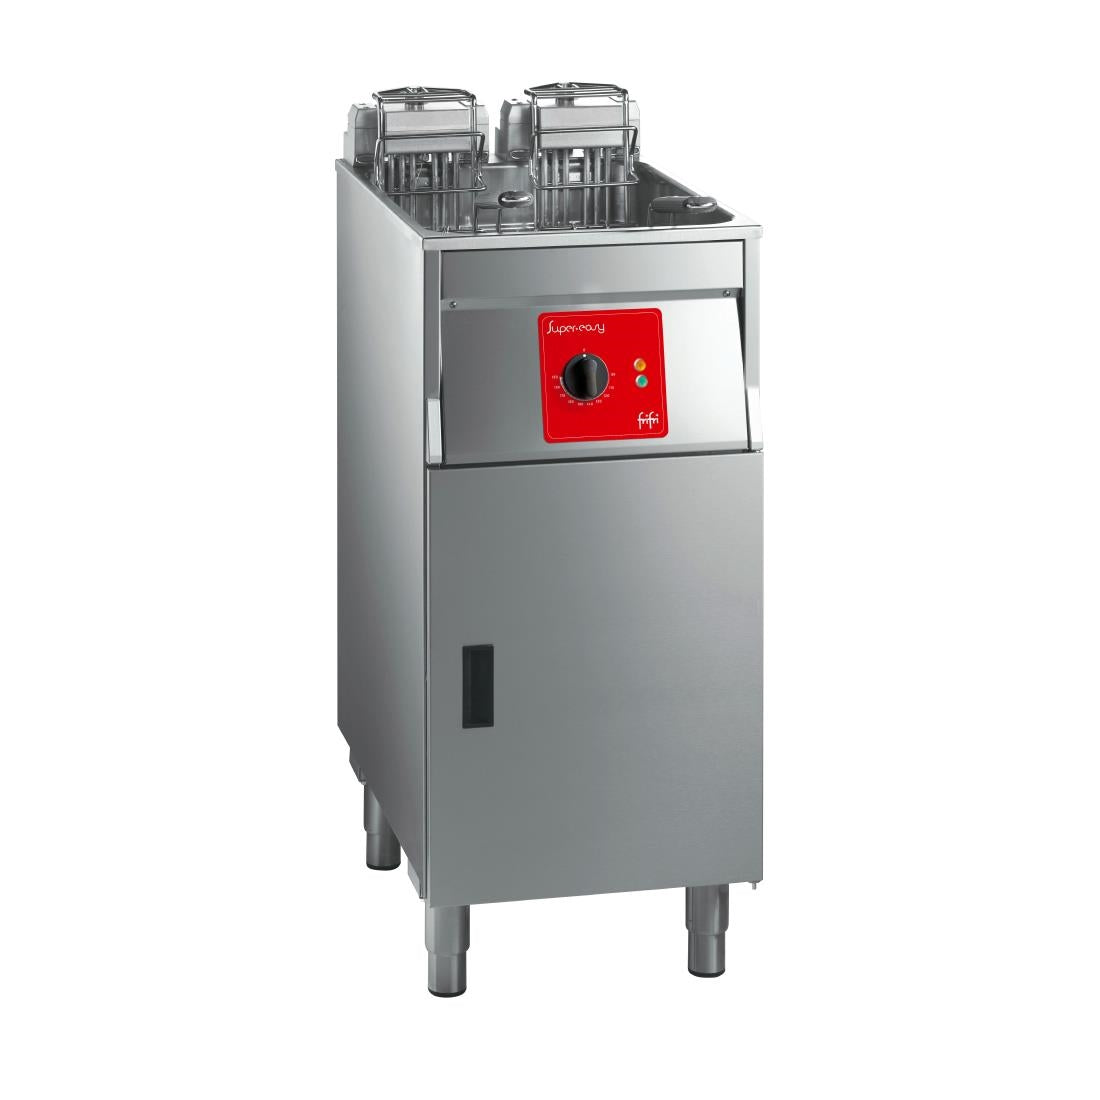 HS059-3PH FriFri Super Easy 412 Electric Free-Standing Single Tank Fryer with Filtration 2 Baskets 15kW - Three Phase